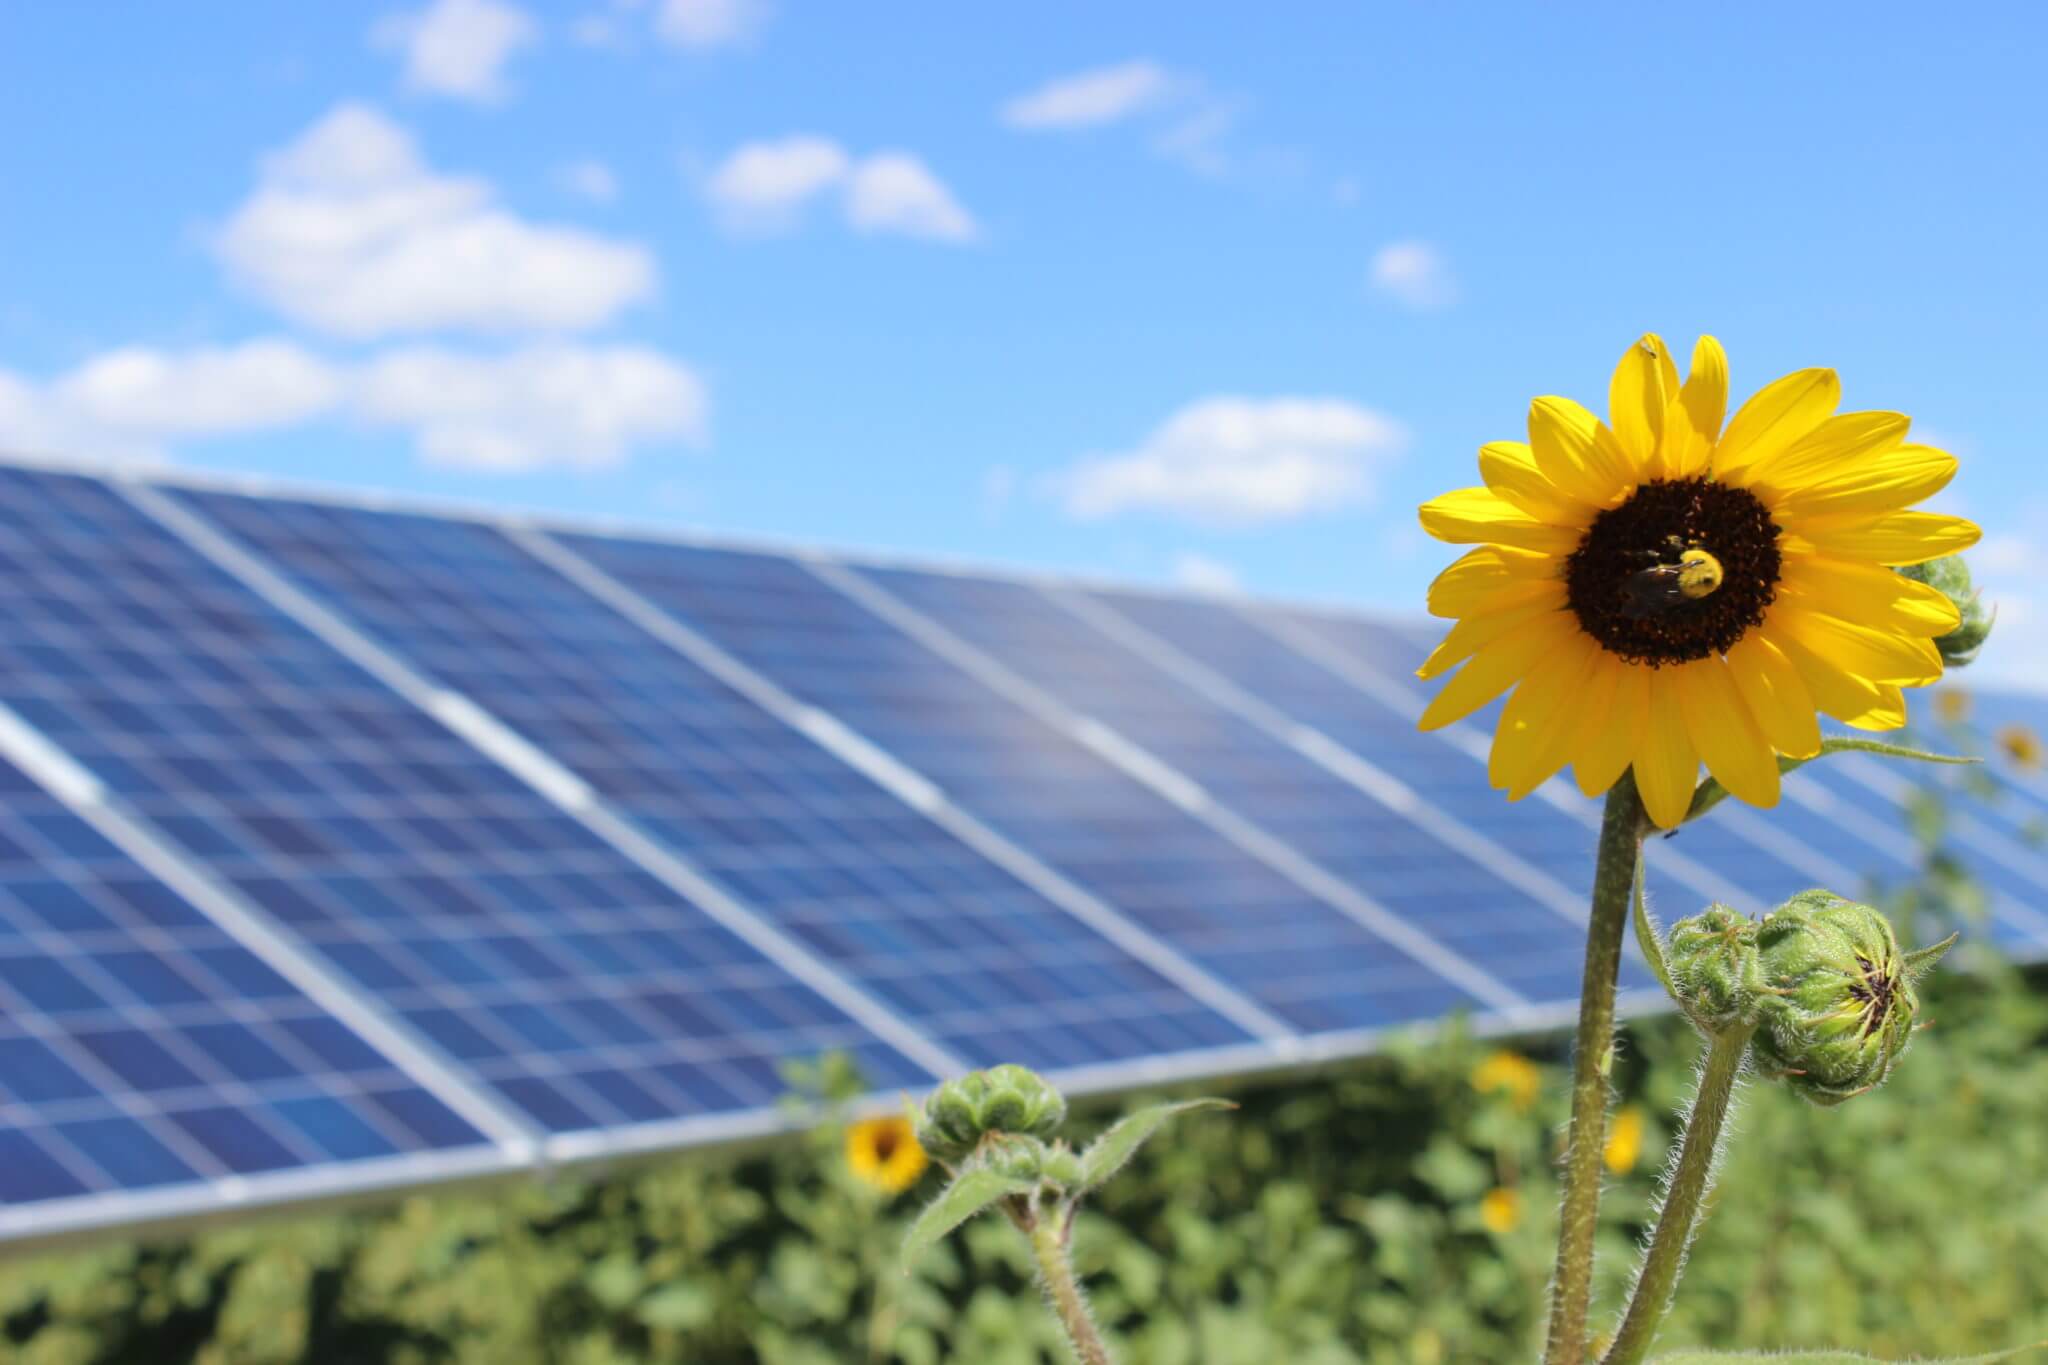 SunShare supports the Colorado community's solar project